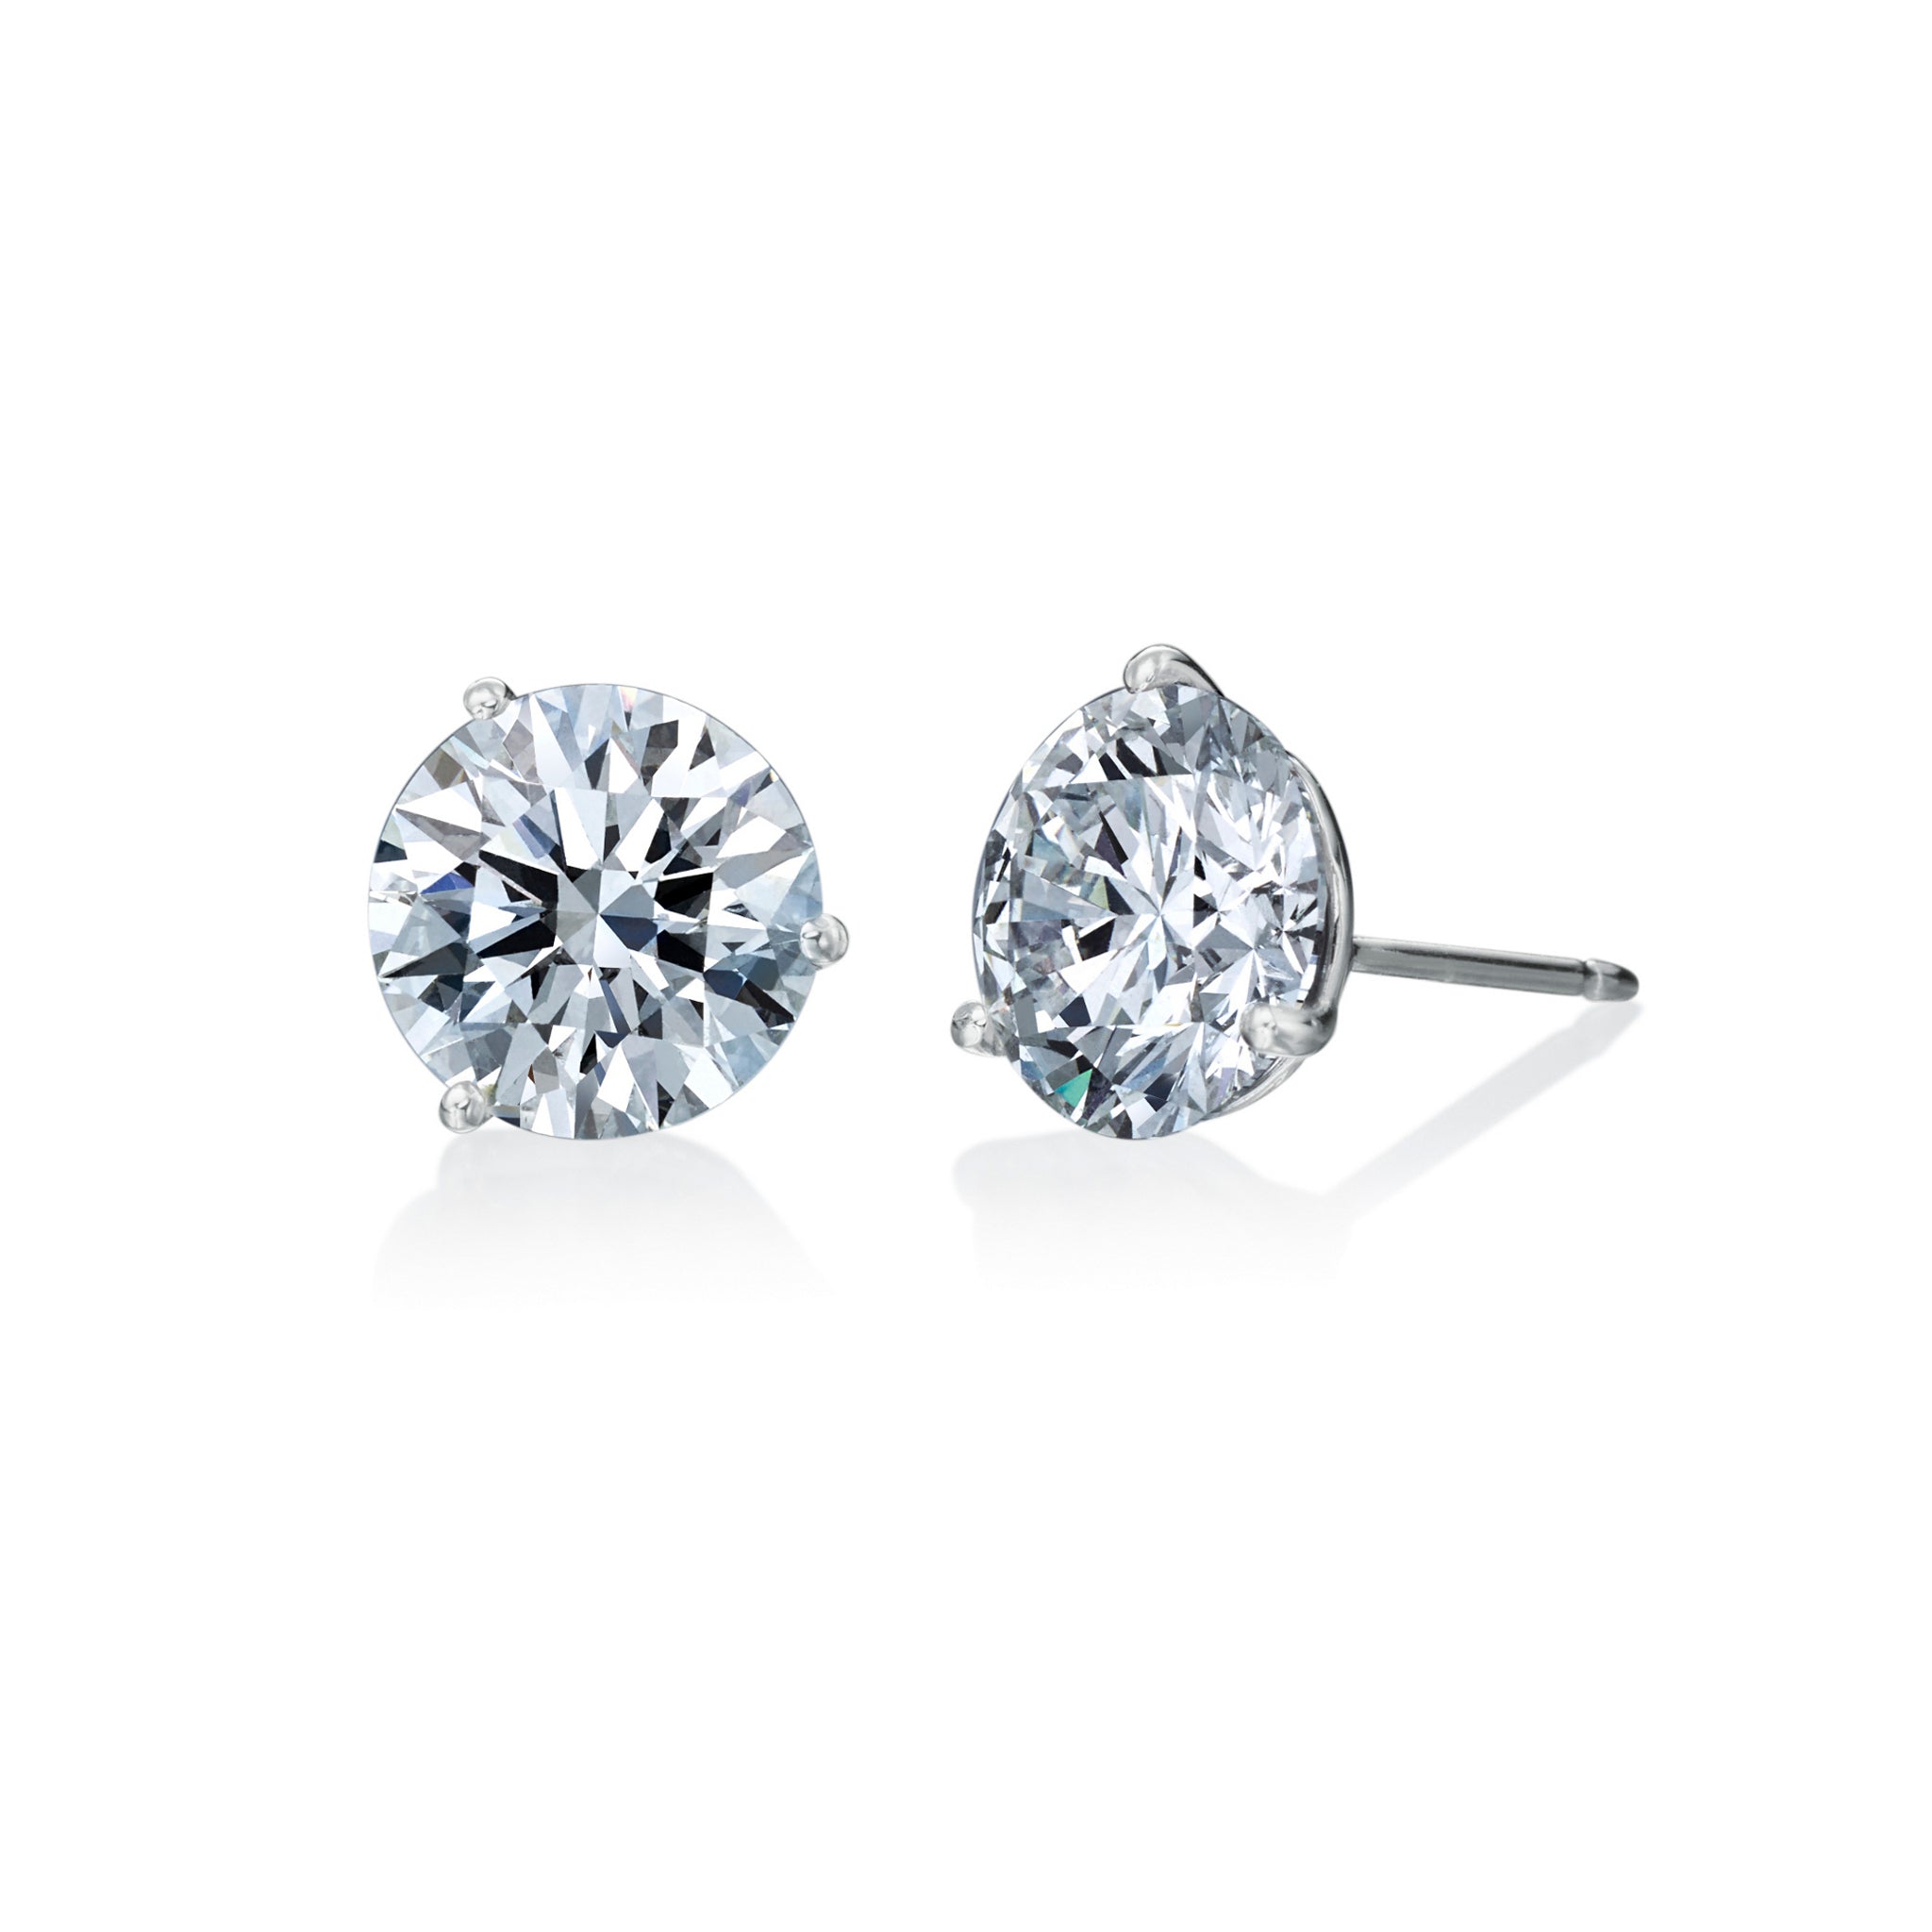 Round Diamond Earring Studs Available in Varying Sizes and Prices